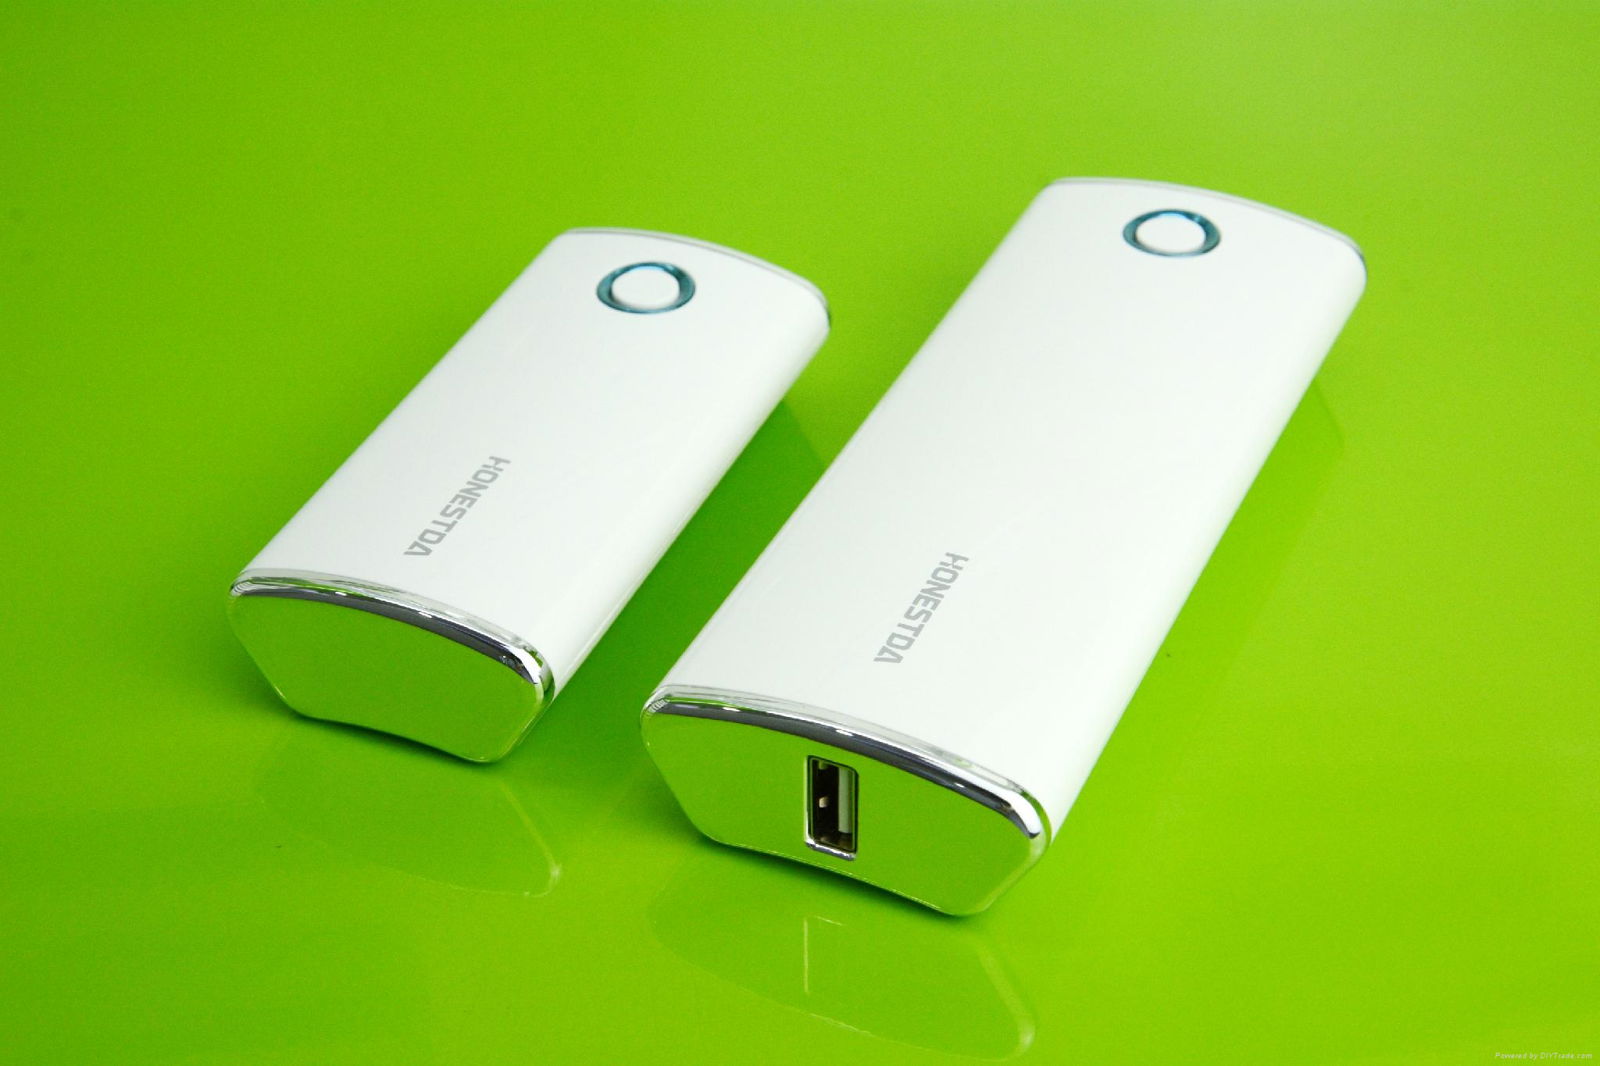 Power Bank 10400mAh, Portable Mobile Power Bank with 1 Year Warranty 4